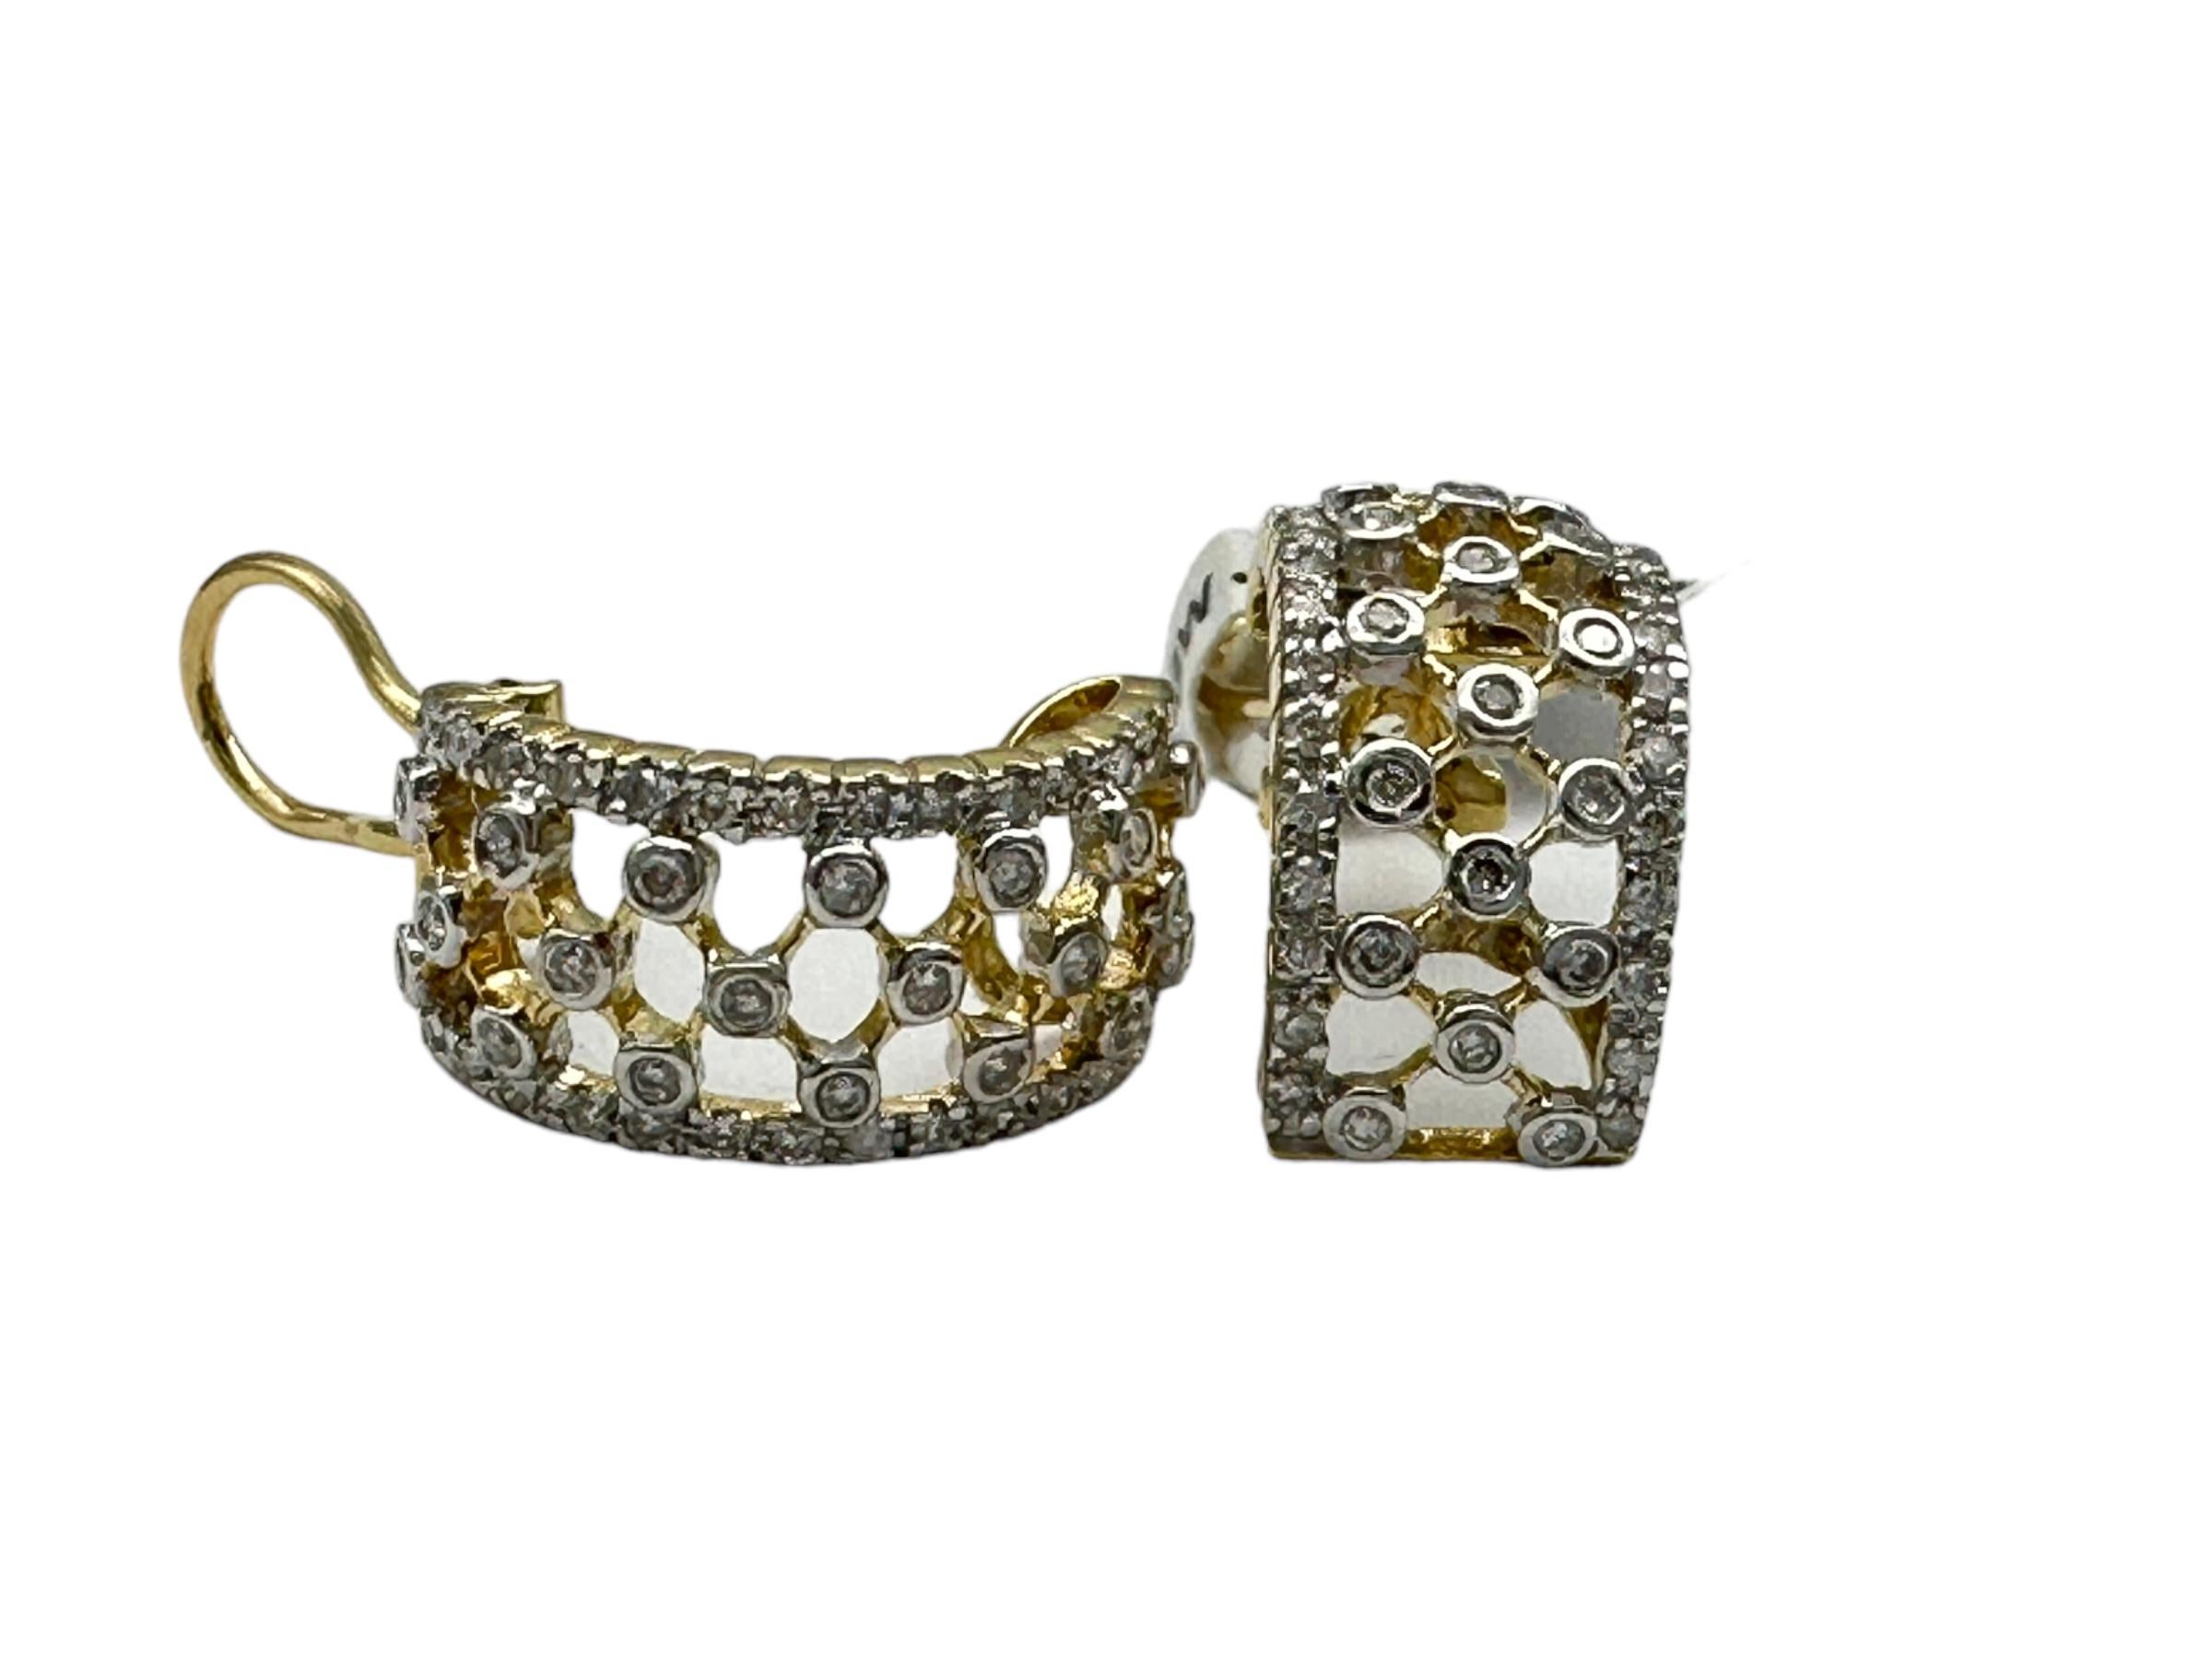 14 Karat white gold diamond earrings with yellow gold trim. The earrings are an open-lacey style with diamonds pave and bezel set. The measurements are .84 inches long x .22 mm wide.
Approximately 80 diamonds average 1.10-1.80 mm having a total